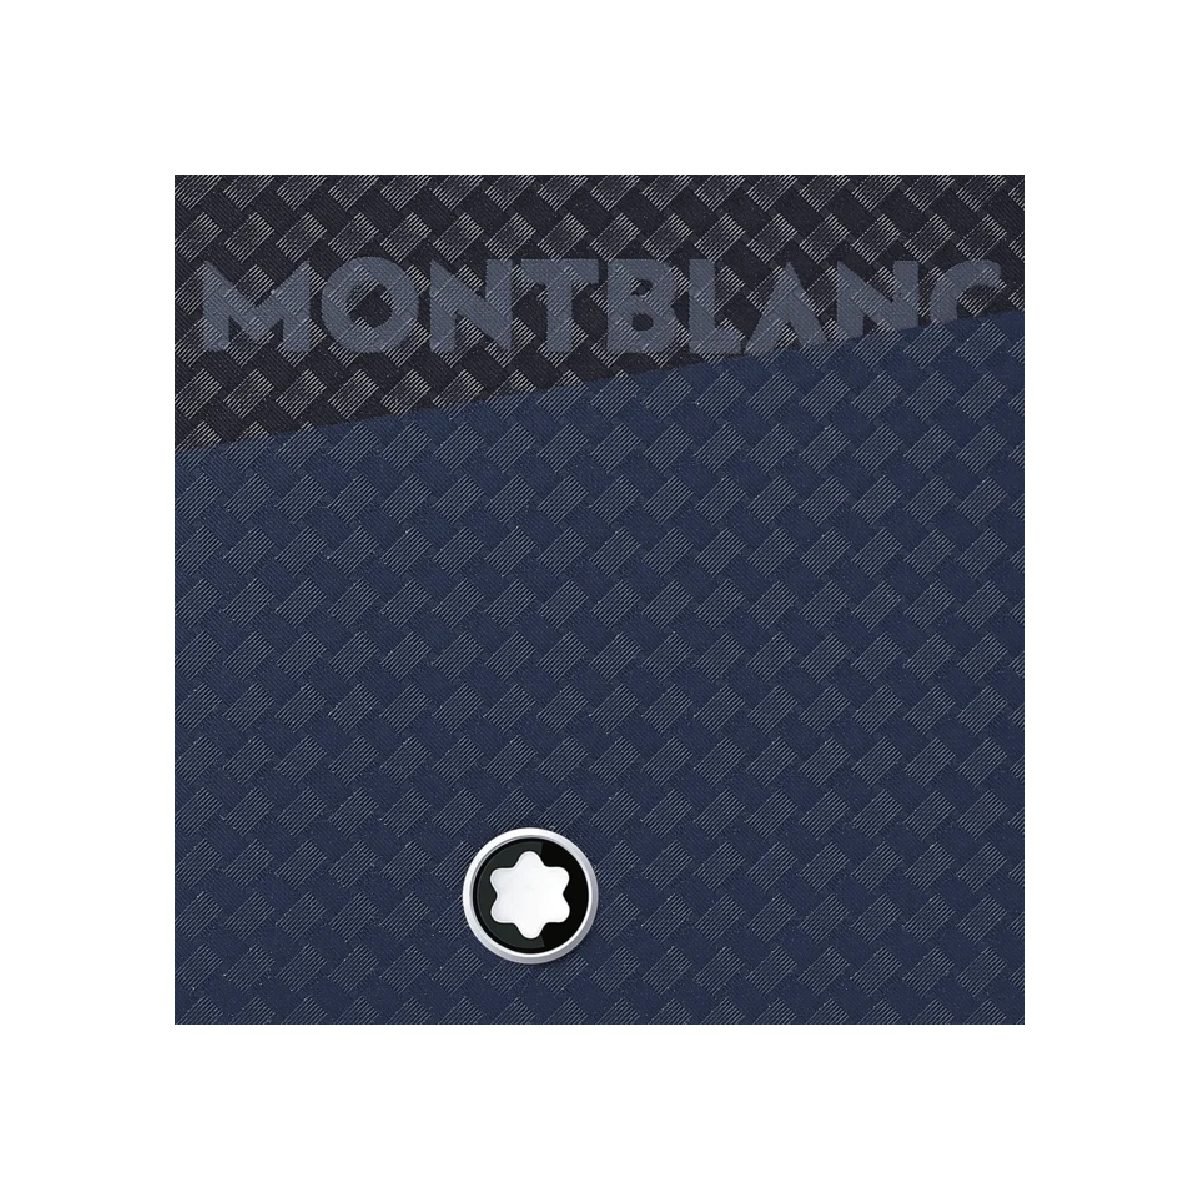 Montblanc MONTBLANC Extreme 2.0 Card holder 127777 black New condition/neuf RFID protect 